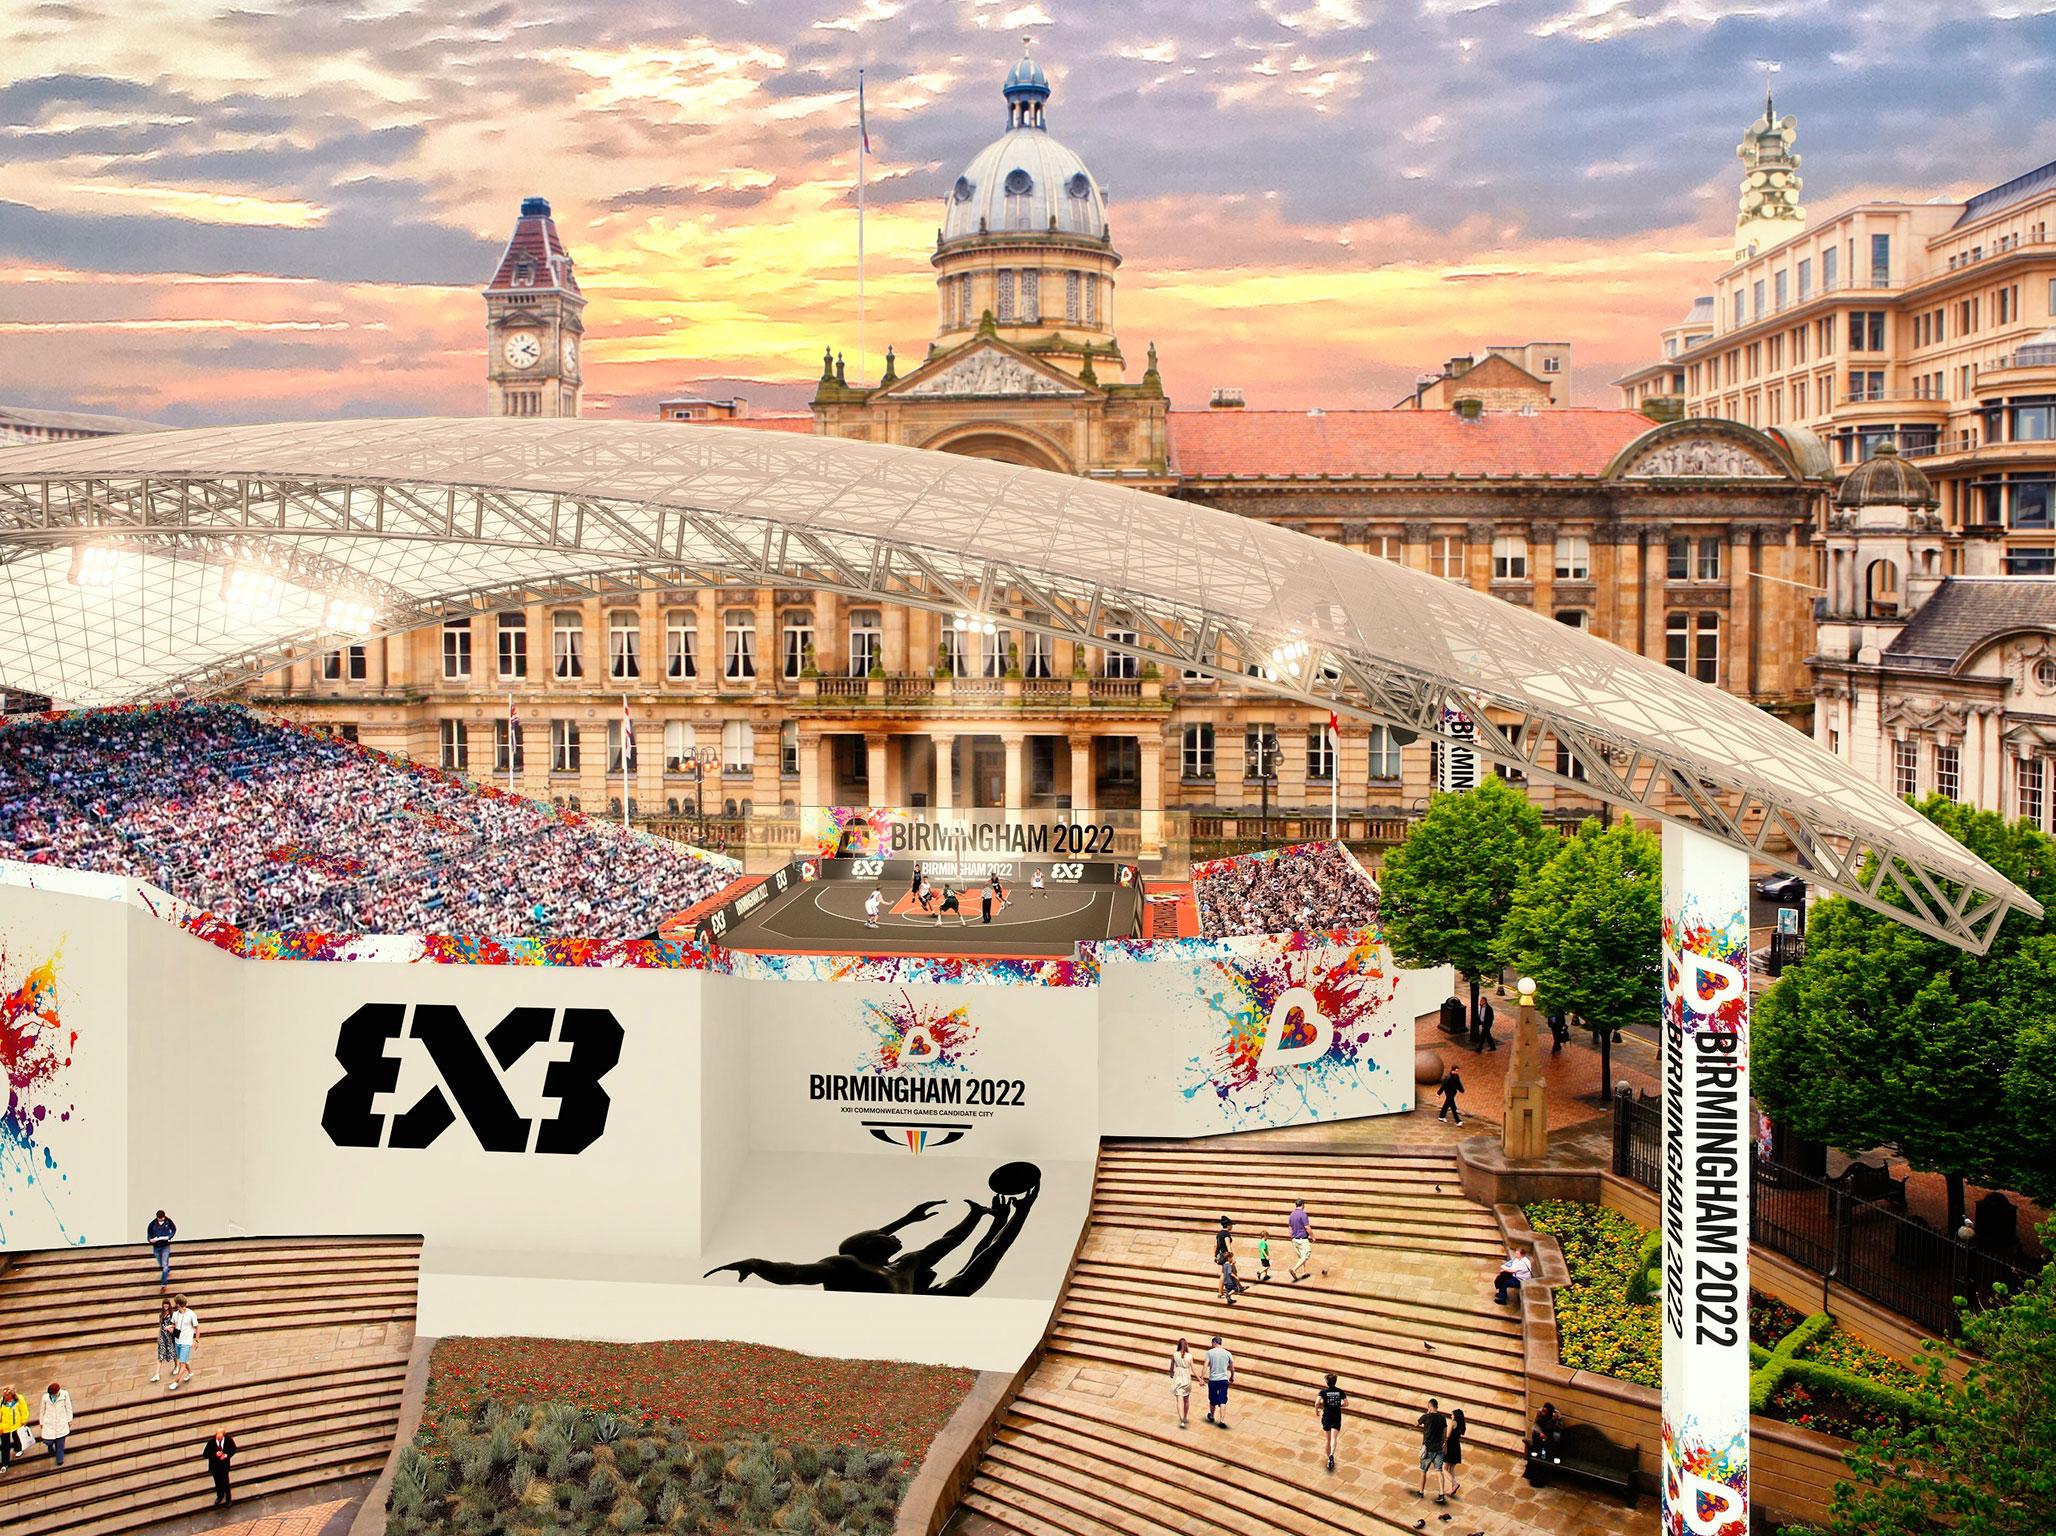 Birmingham is set to host the 2022 Commonwealth Games